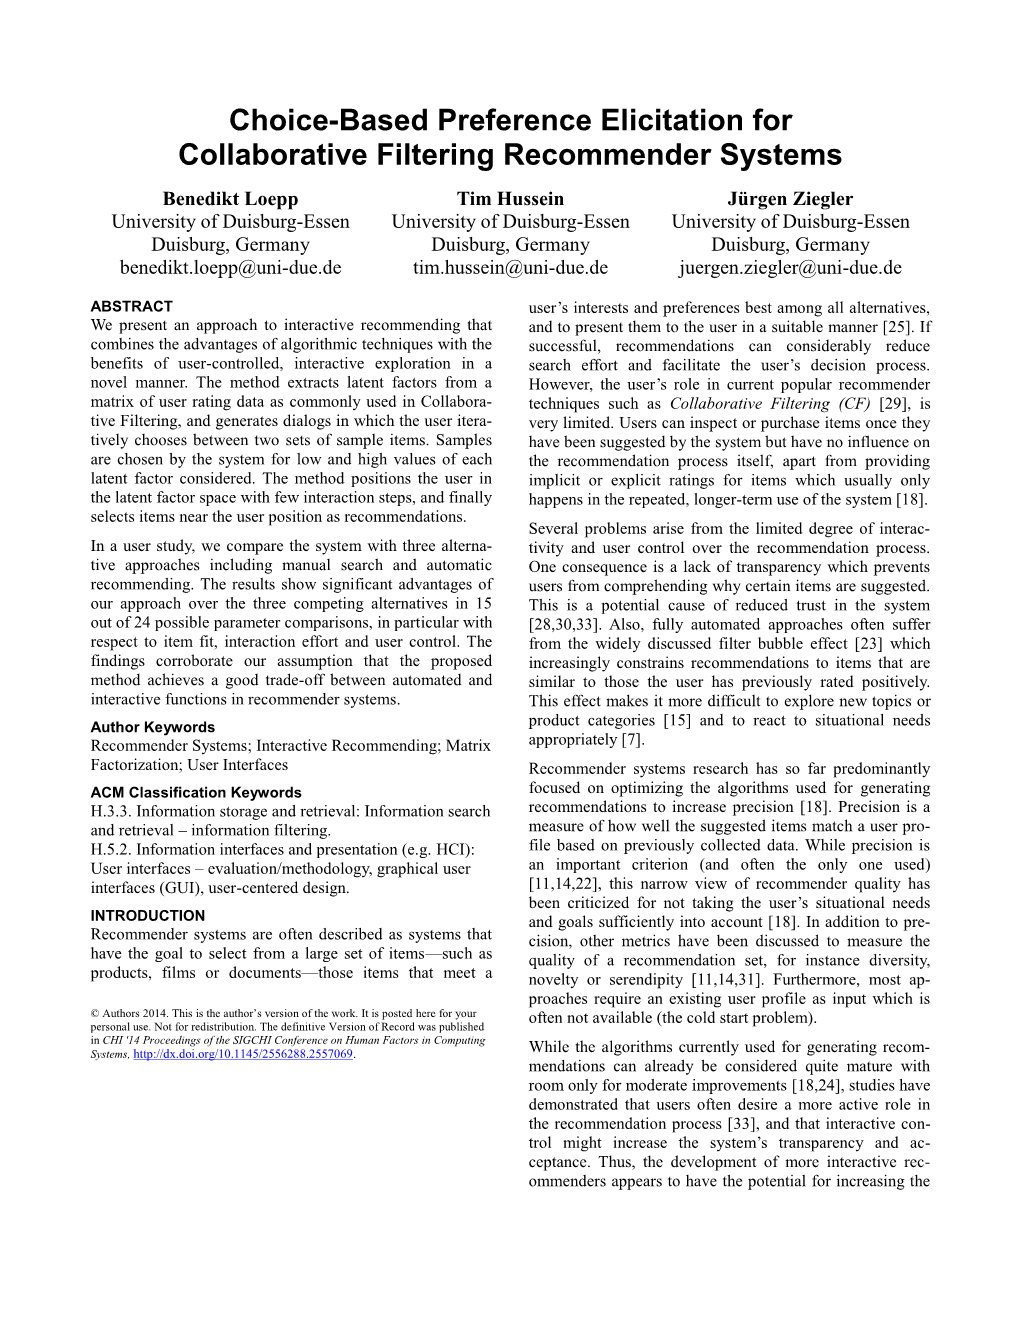 Choice-Based Preference Elicitation for Collaborative Filtering